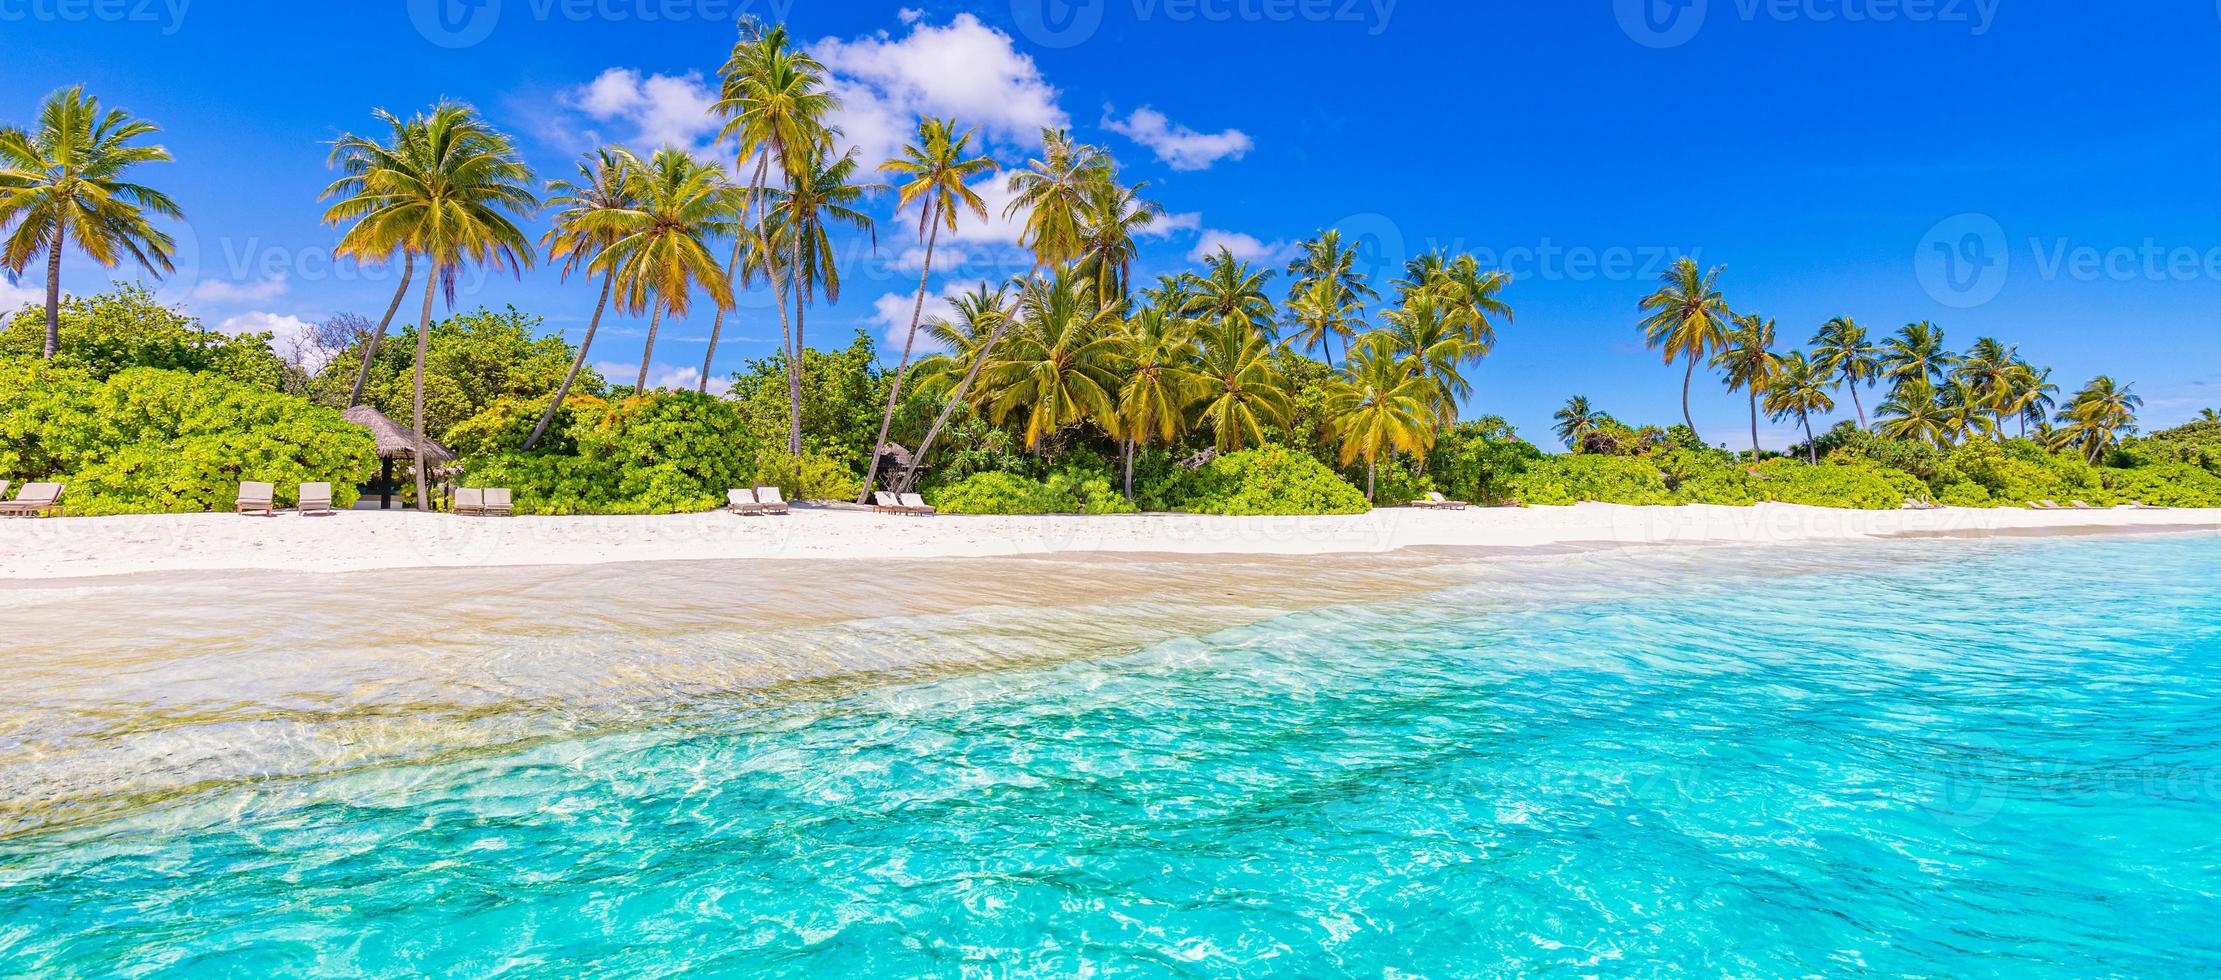 Panoramic Maldives island beach. Tropical landscape summer panorama, white sand with palm trees sea. Luxury travel vacation destination. Exotic beach landscape. Amazing nature, relax, freedom nature photo